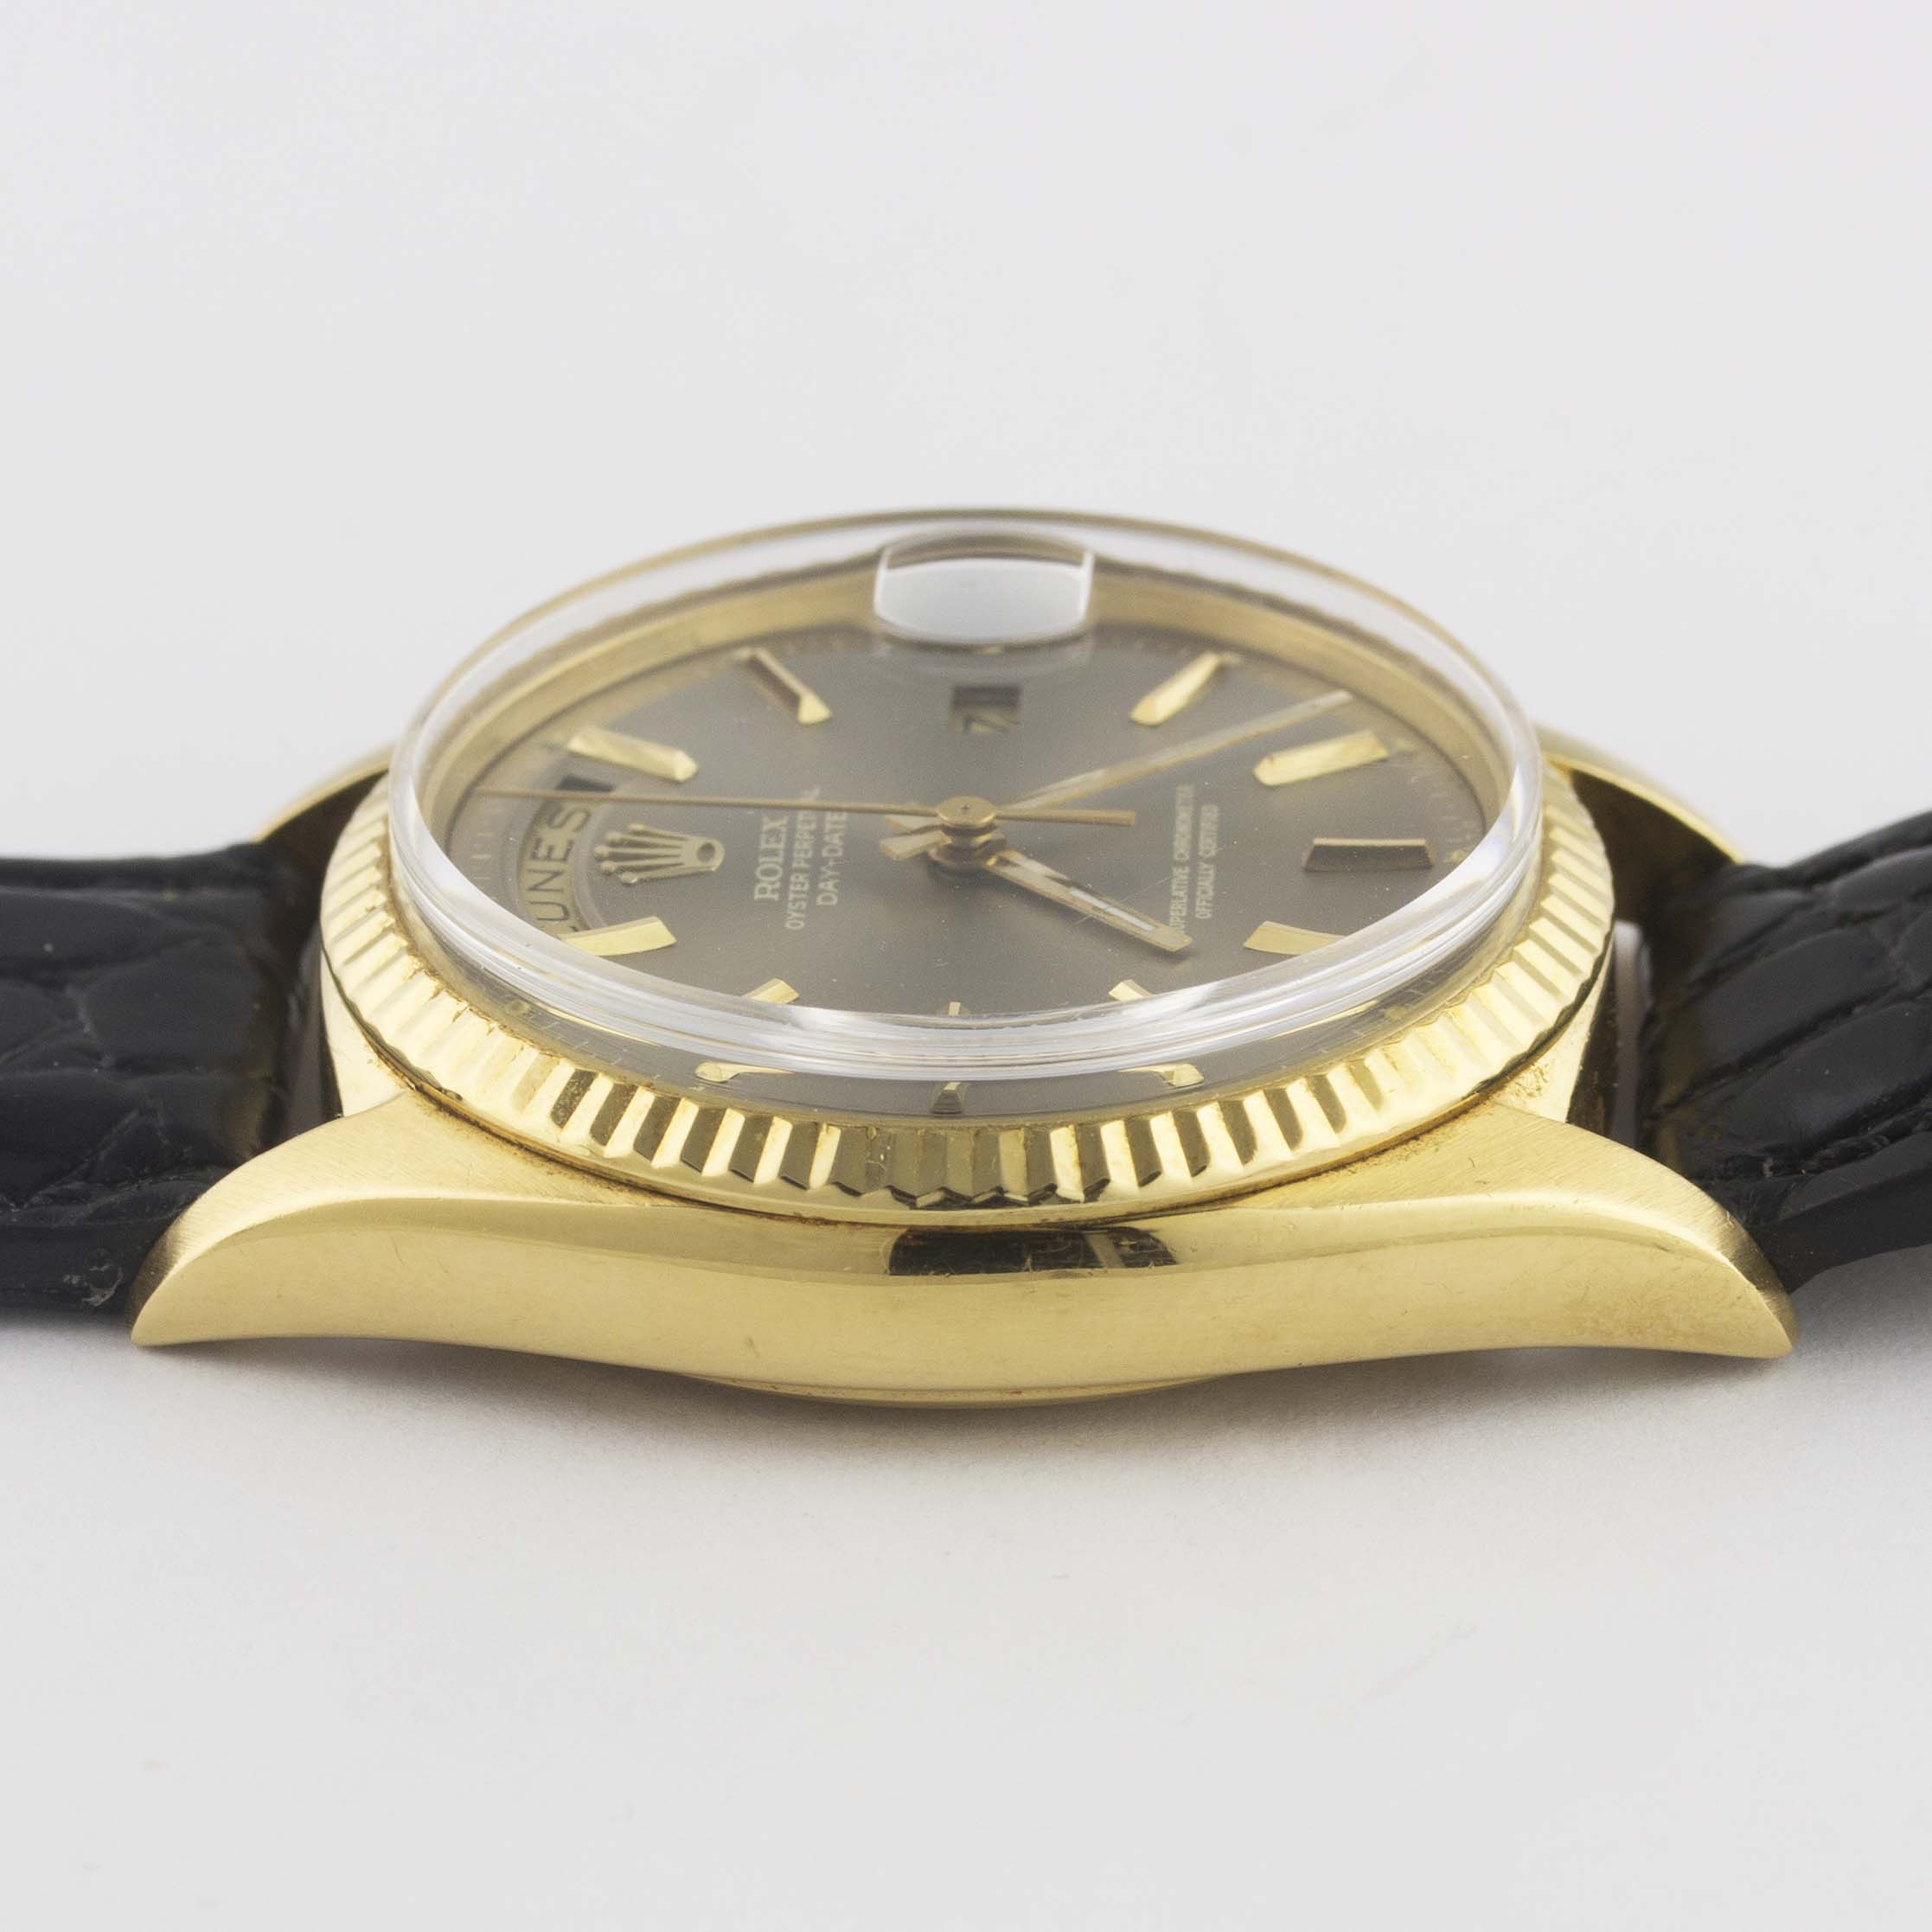 A RARE GENTLEMAN'S 18K SOLID GOLD ROLEX OYSTER PERPETUAL DAY DATE WRIST WATCH CIRCA 1972, REF. - Image 11 of 11